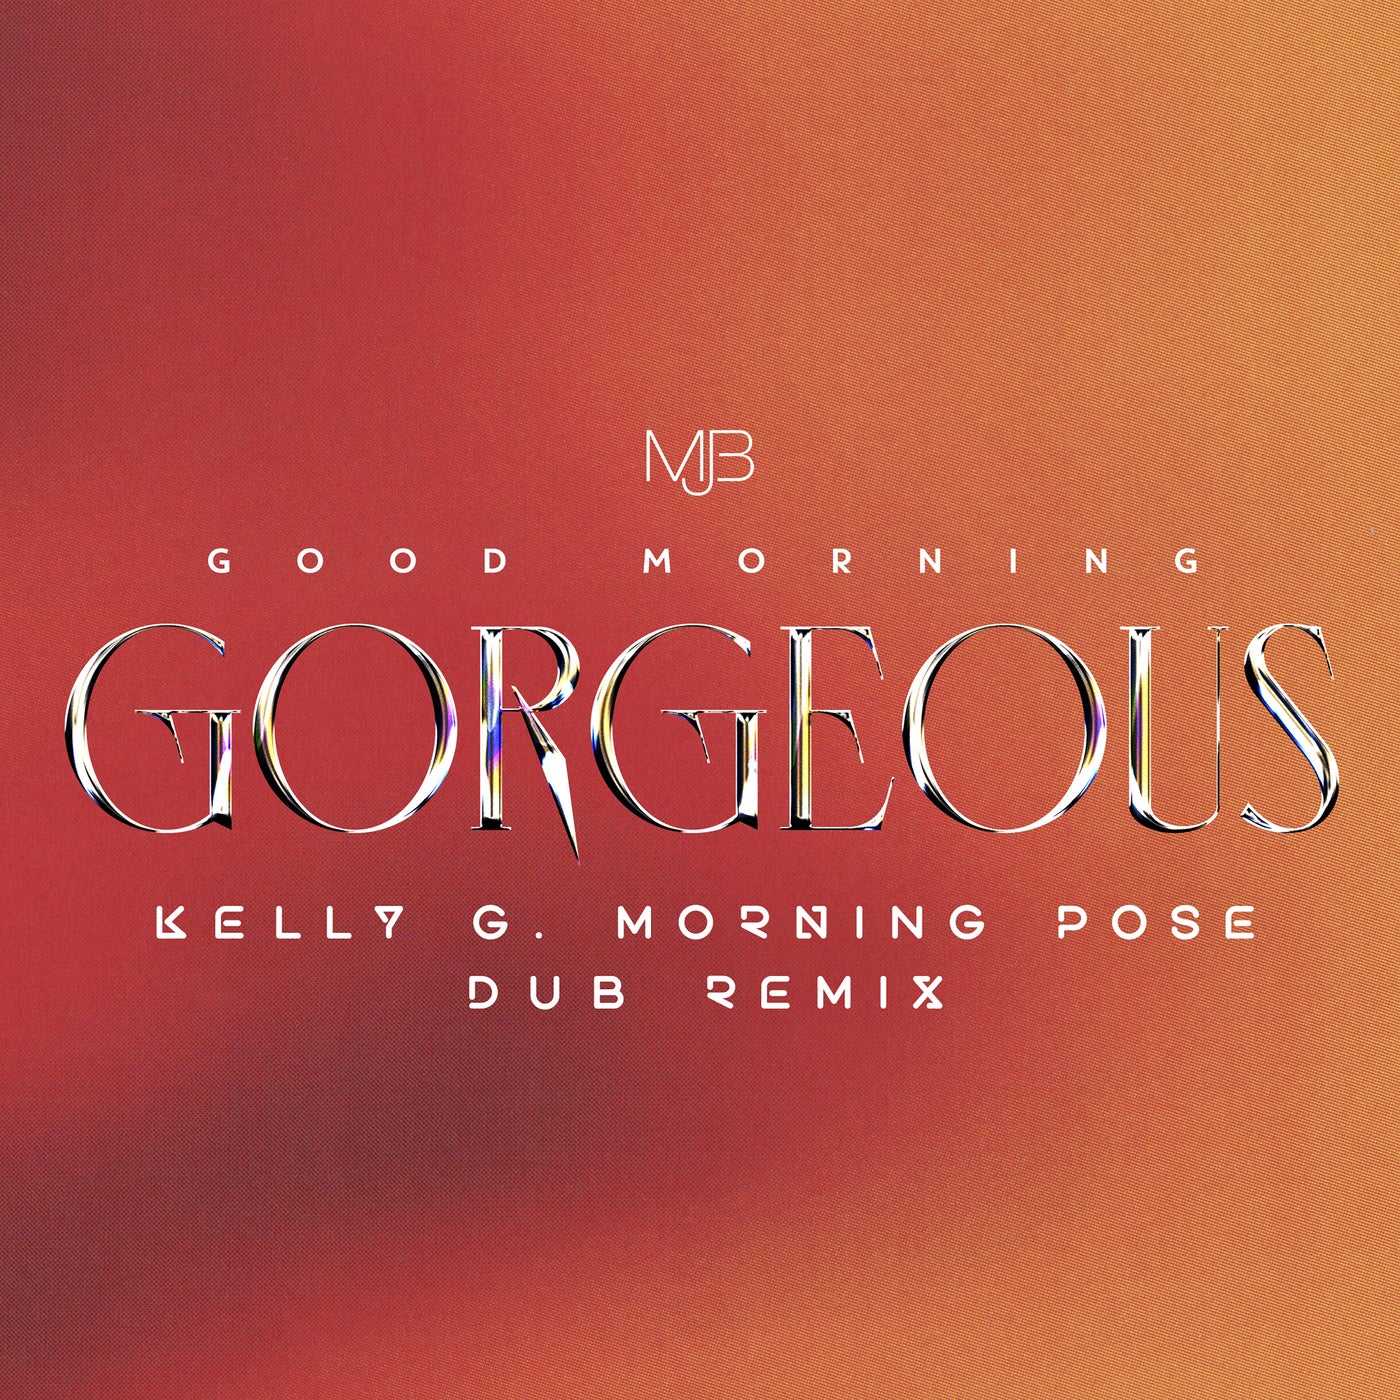 Good Morning Gorgeous (Kelly G Morning Pose Dub Remix) [Extended Version]